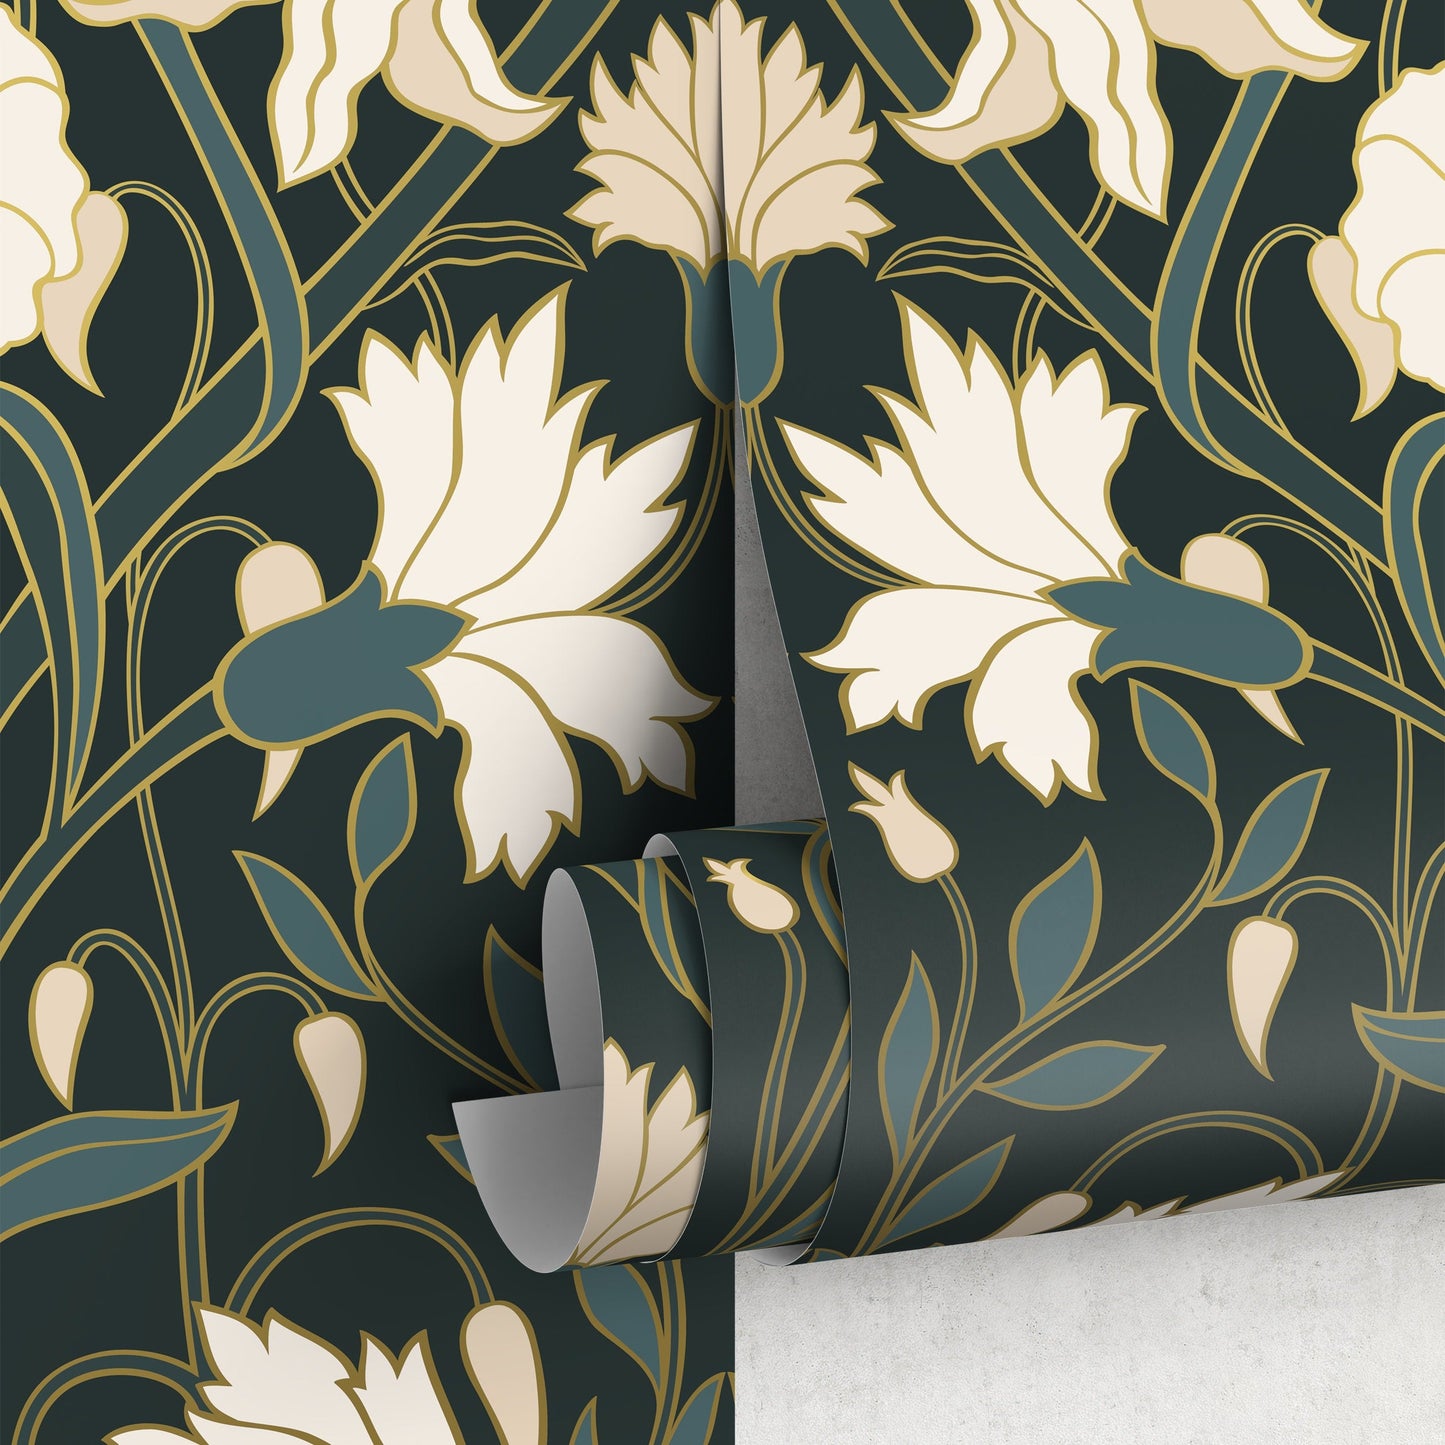 Green Floral Art Nouveau Wallpaper Peel and Stick and Traditional Wallpaper - C281